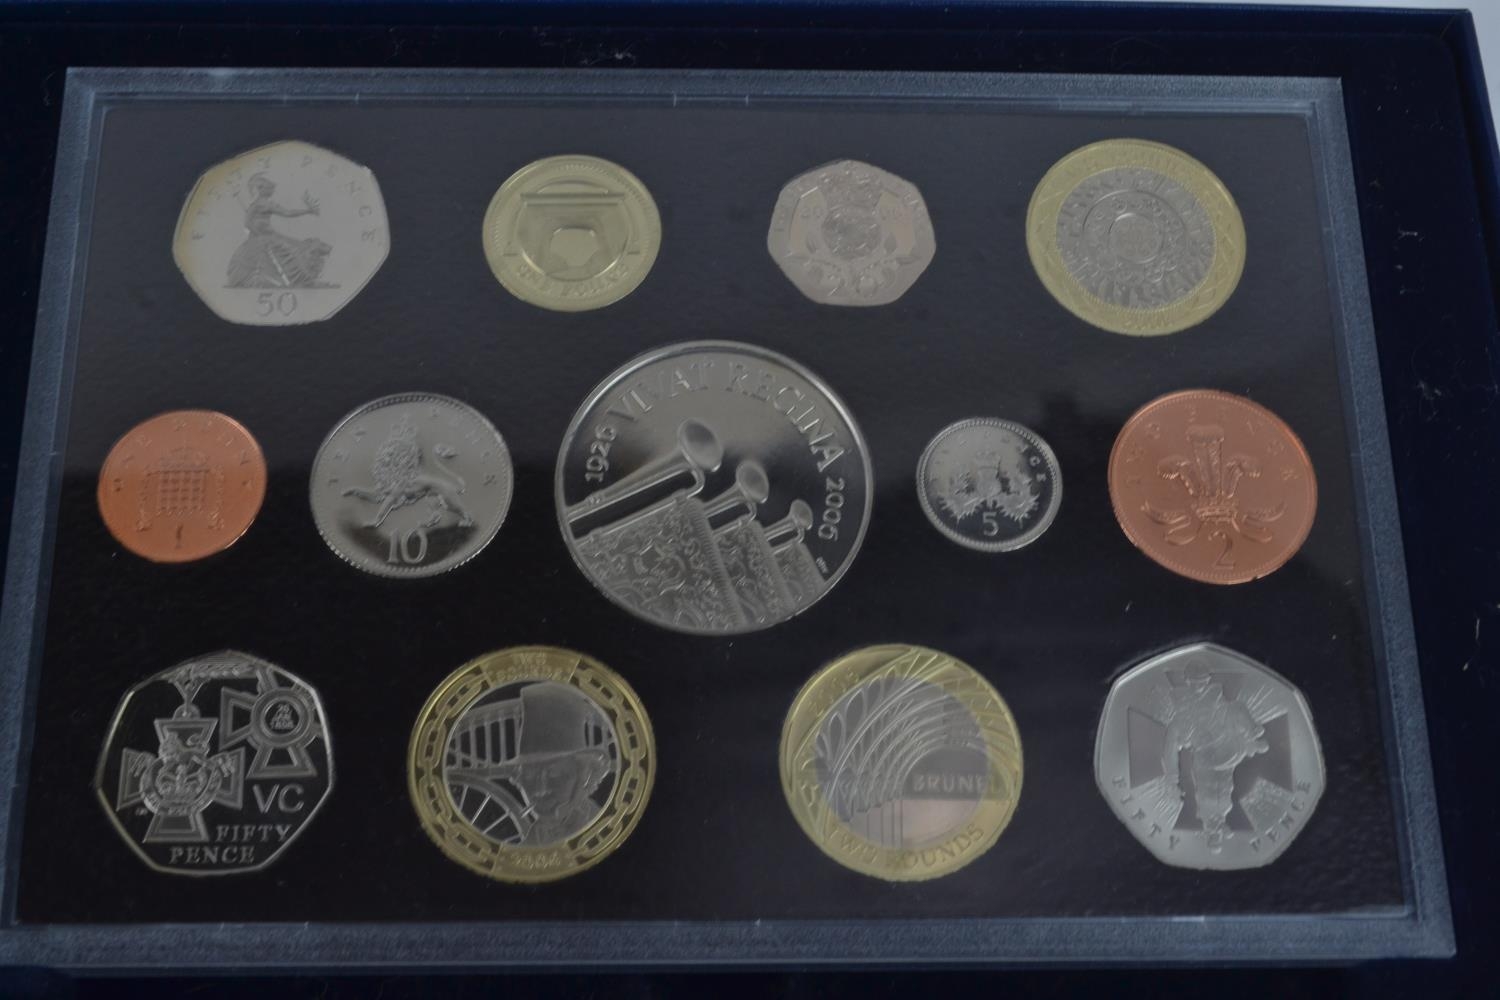 Five Royal Mint UK proof coin sets in presentation boxes, including 2001 Glimpses of the Victorian E - Image 4 of 6